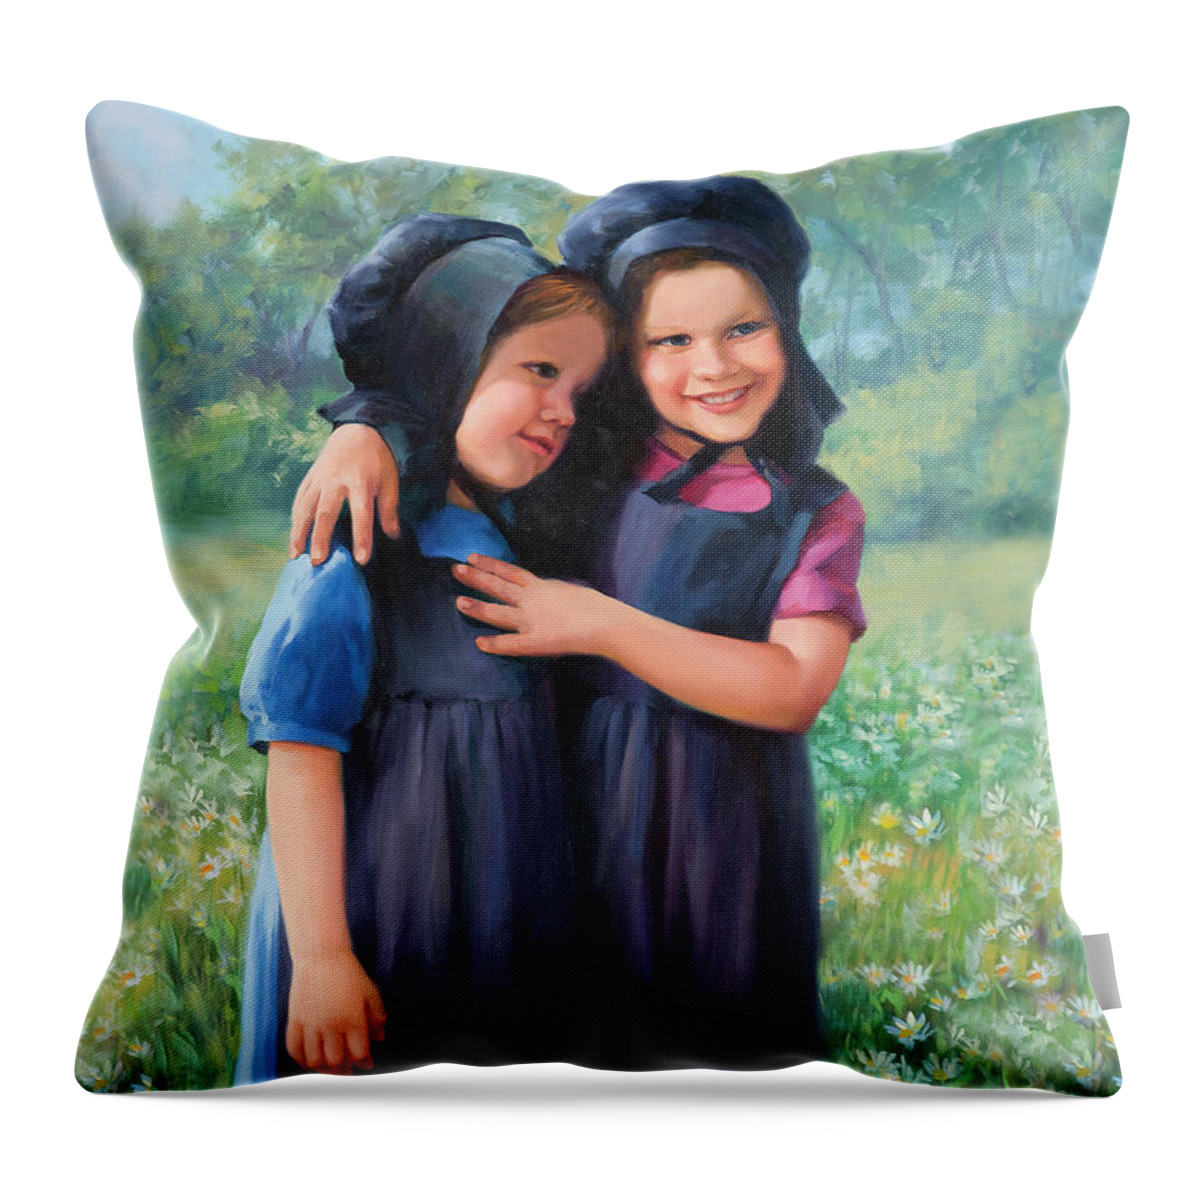 Amish Throw Pillow featuring the painting Sisters by Laurie Snow Hein